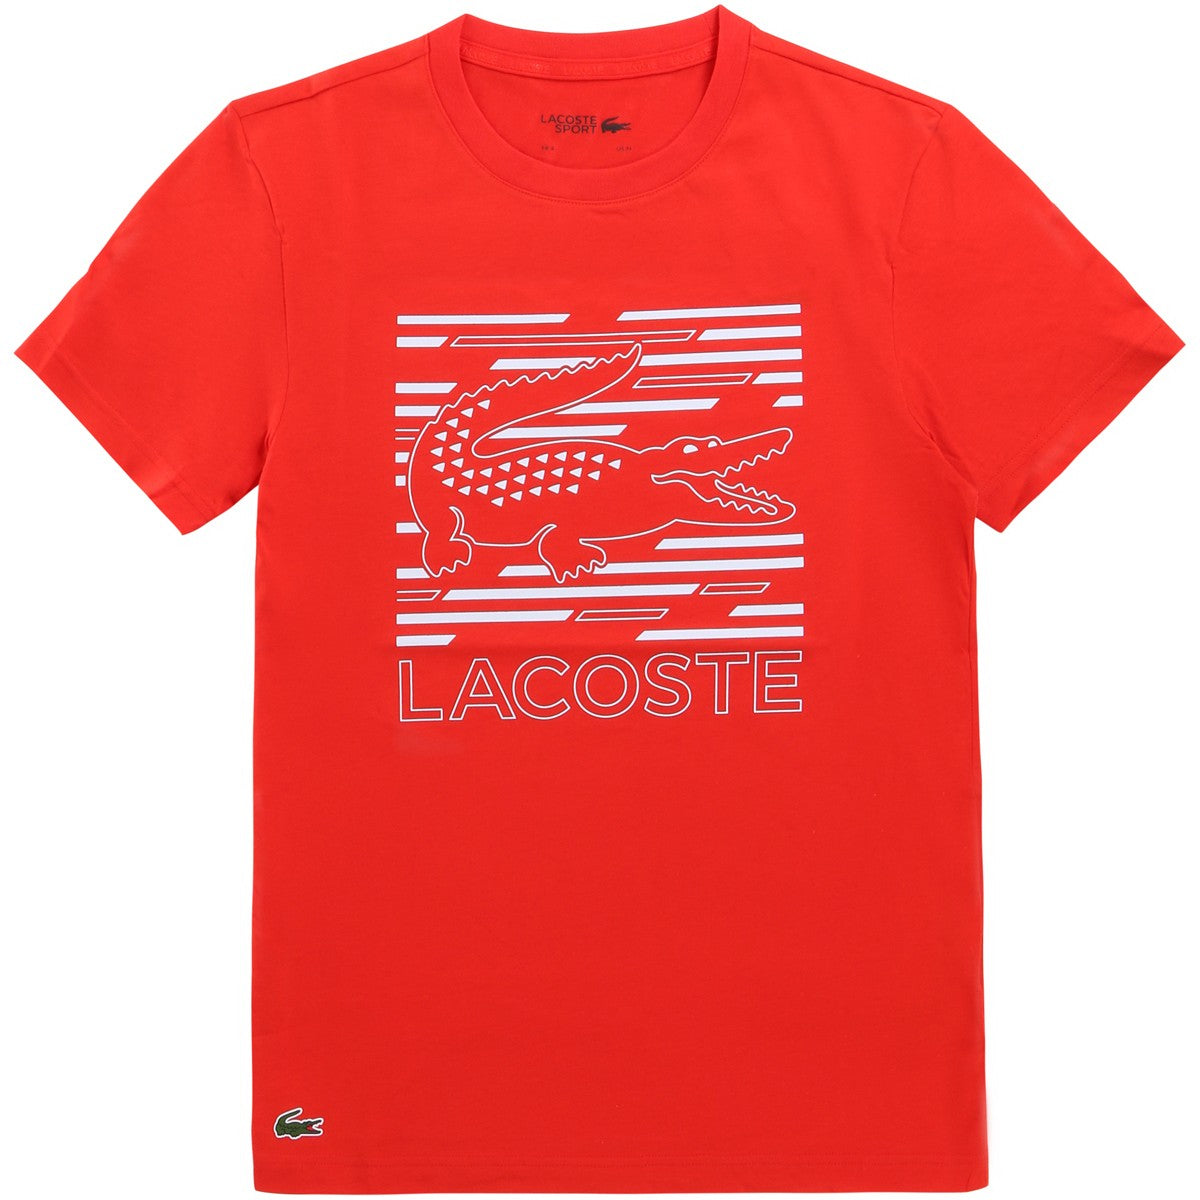 LaCoste-Men’s SPORT Ultra-Dry Graphic Tee-Red/White •75S-TH4834